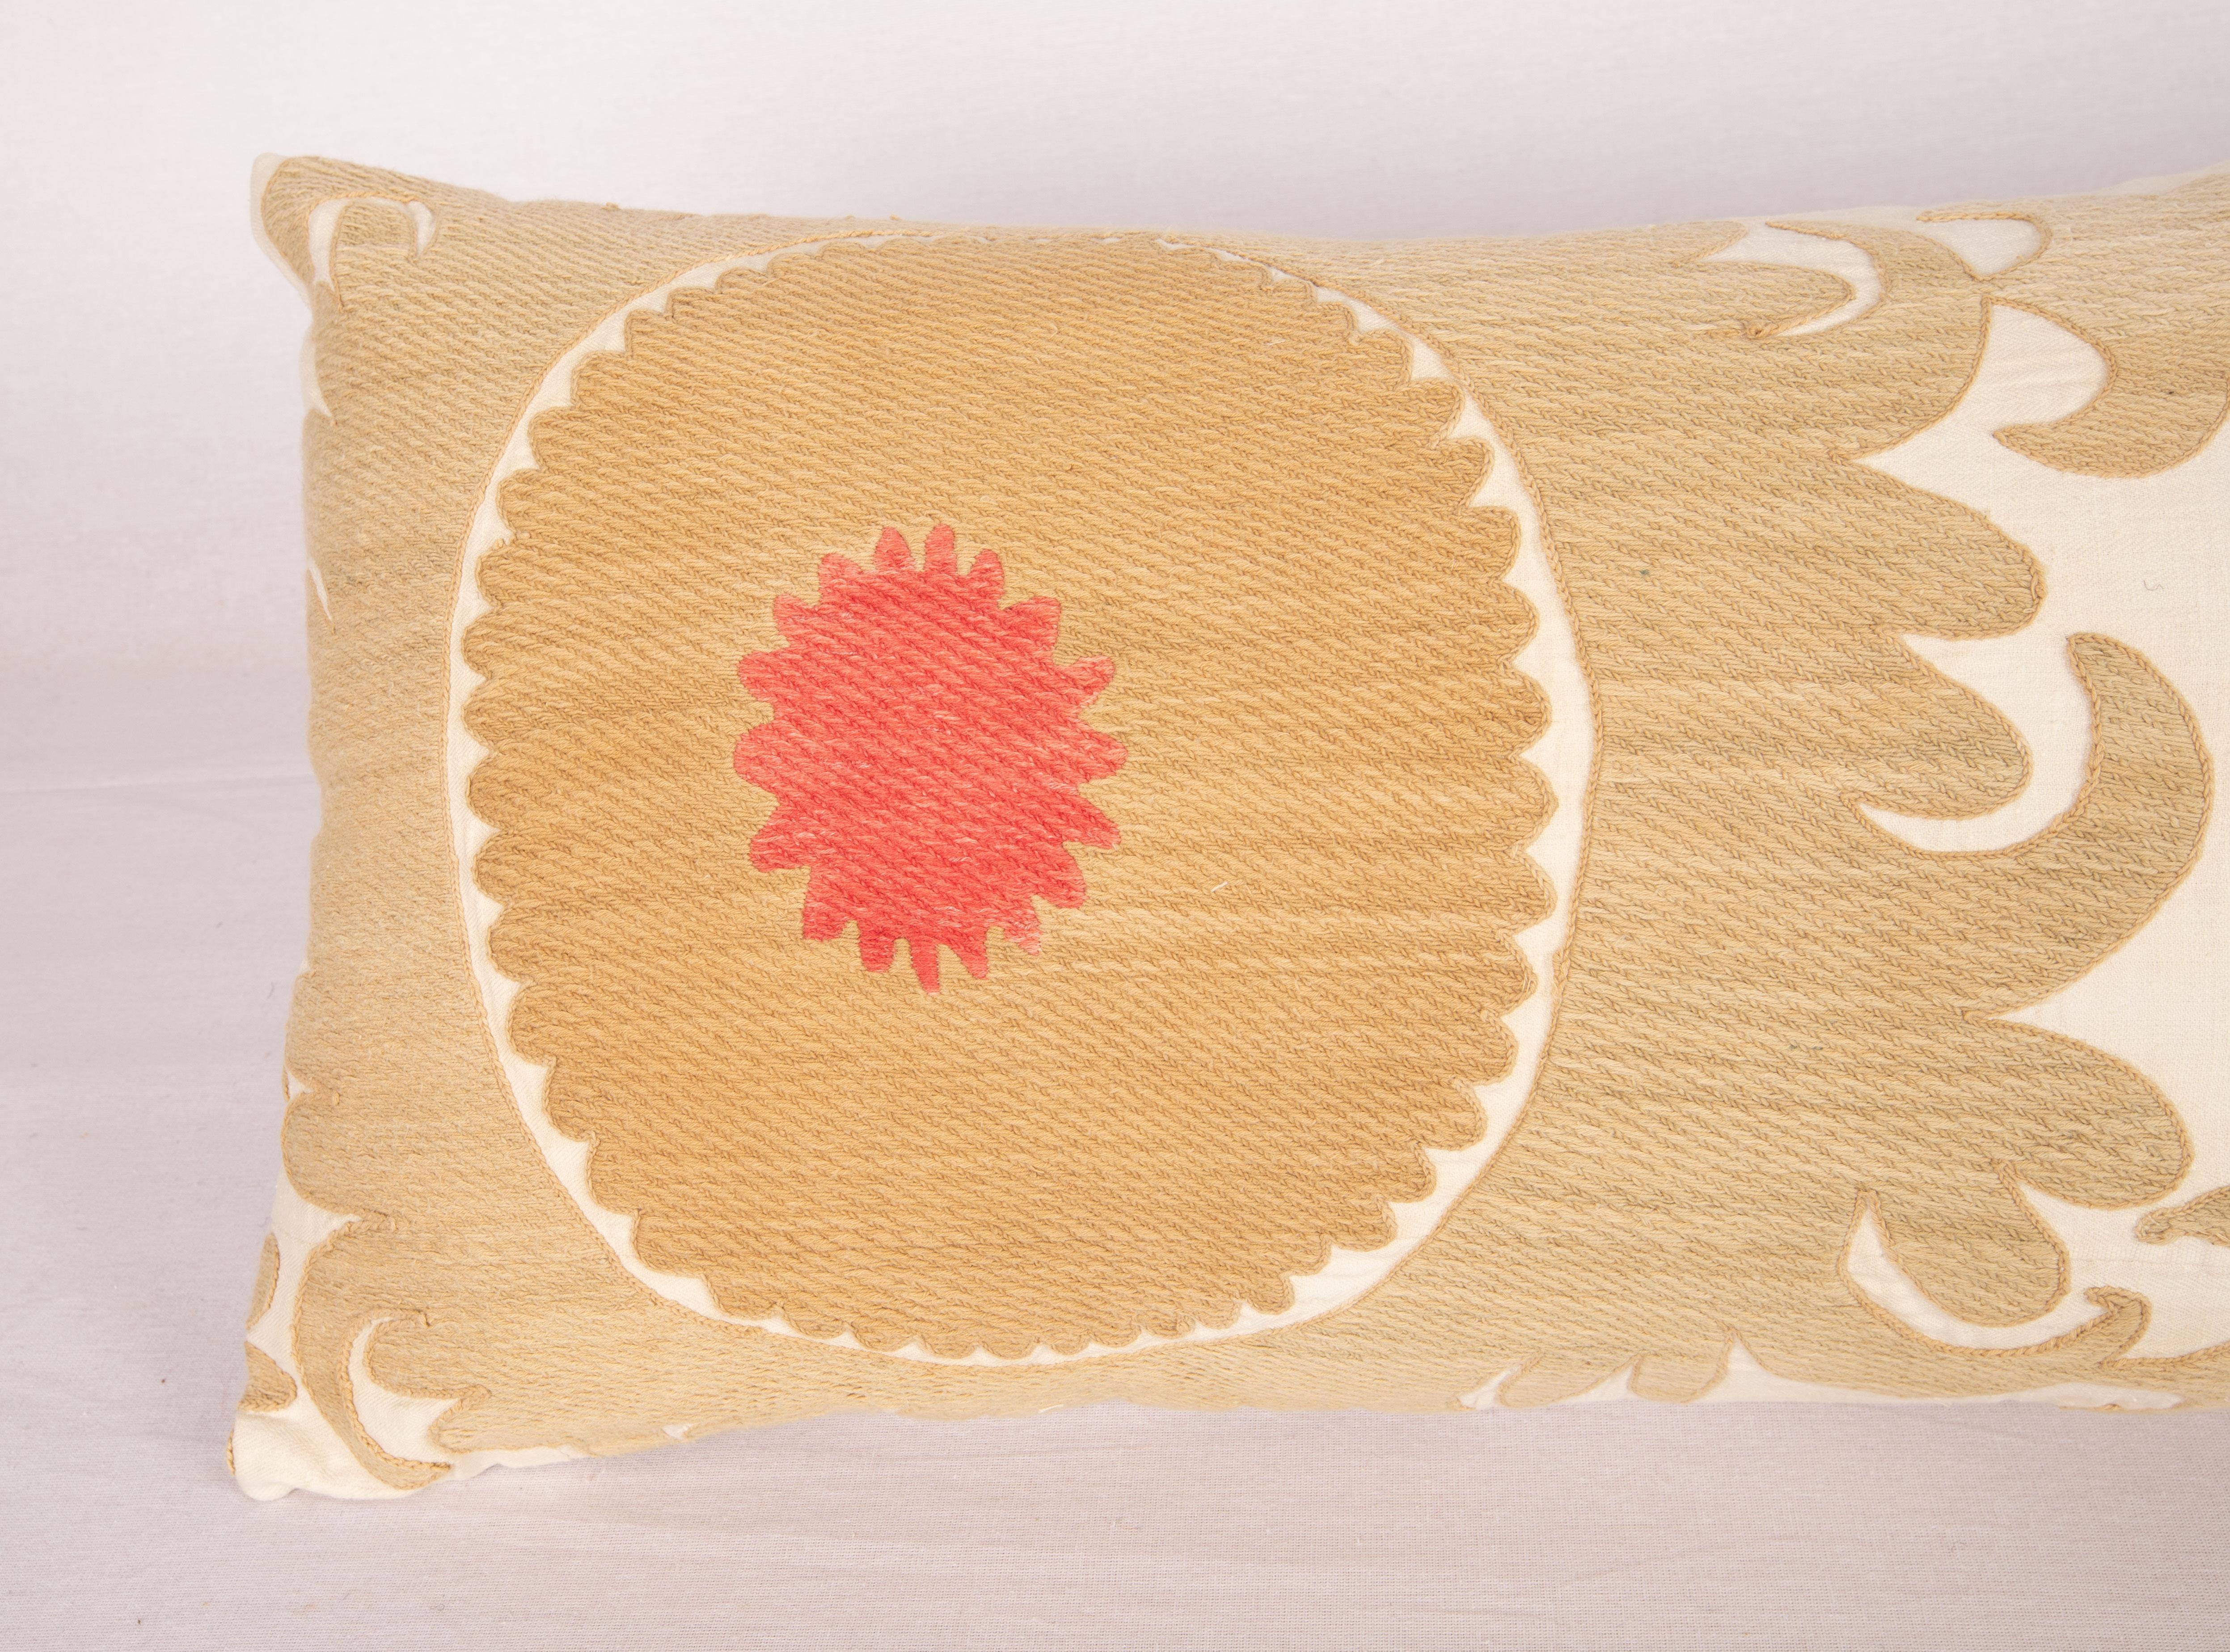 Embroidered Vintage Suzani Lumbar Pillow Case, Mid 20th C.